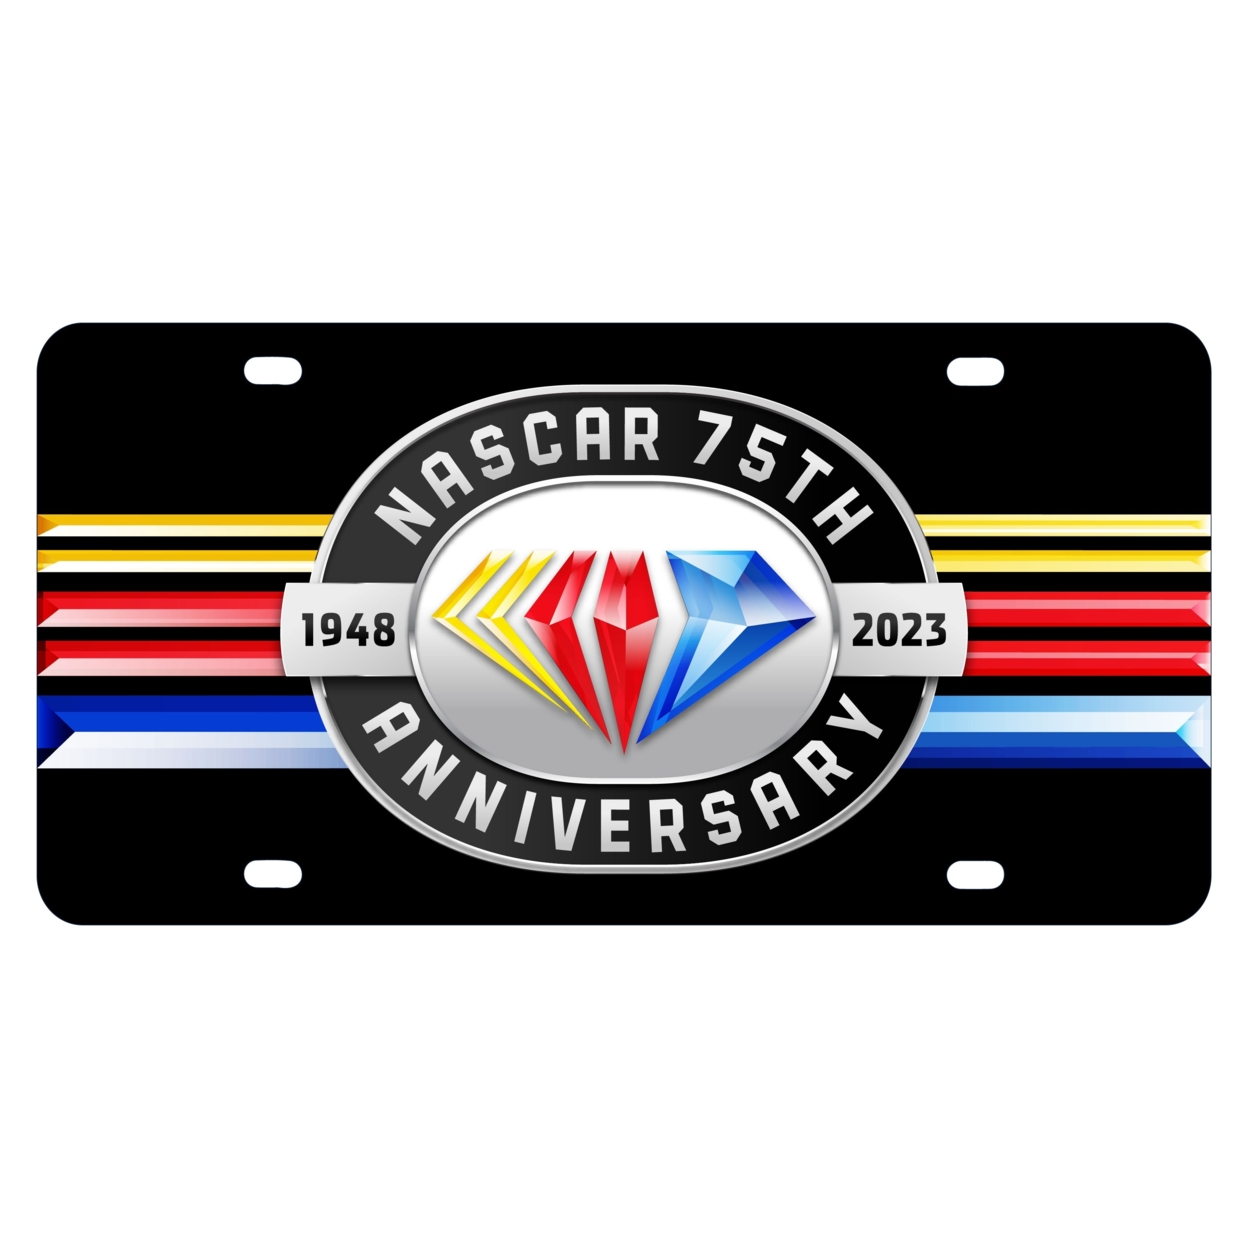 Officially Licensed NASCAR 75 Year Anniversary Metal License Plate